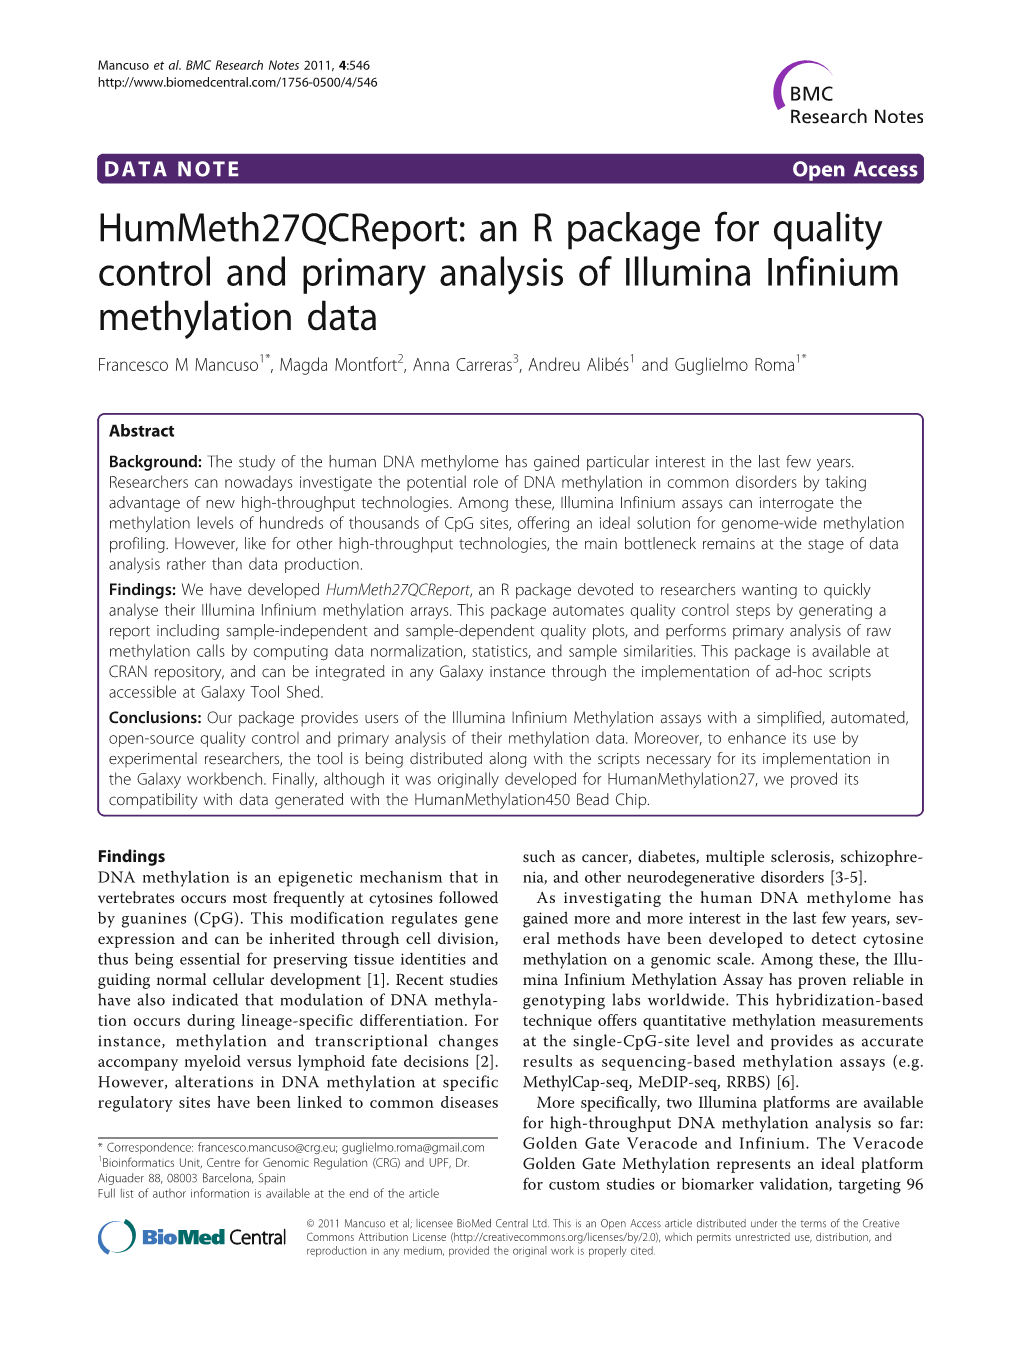 An R Package for Quality Control and Primary Analysis Of